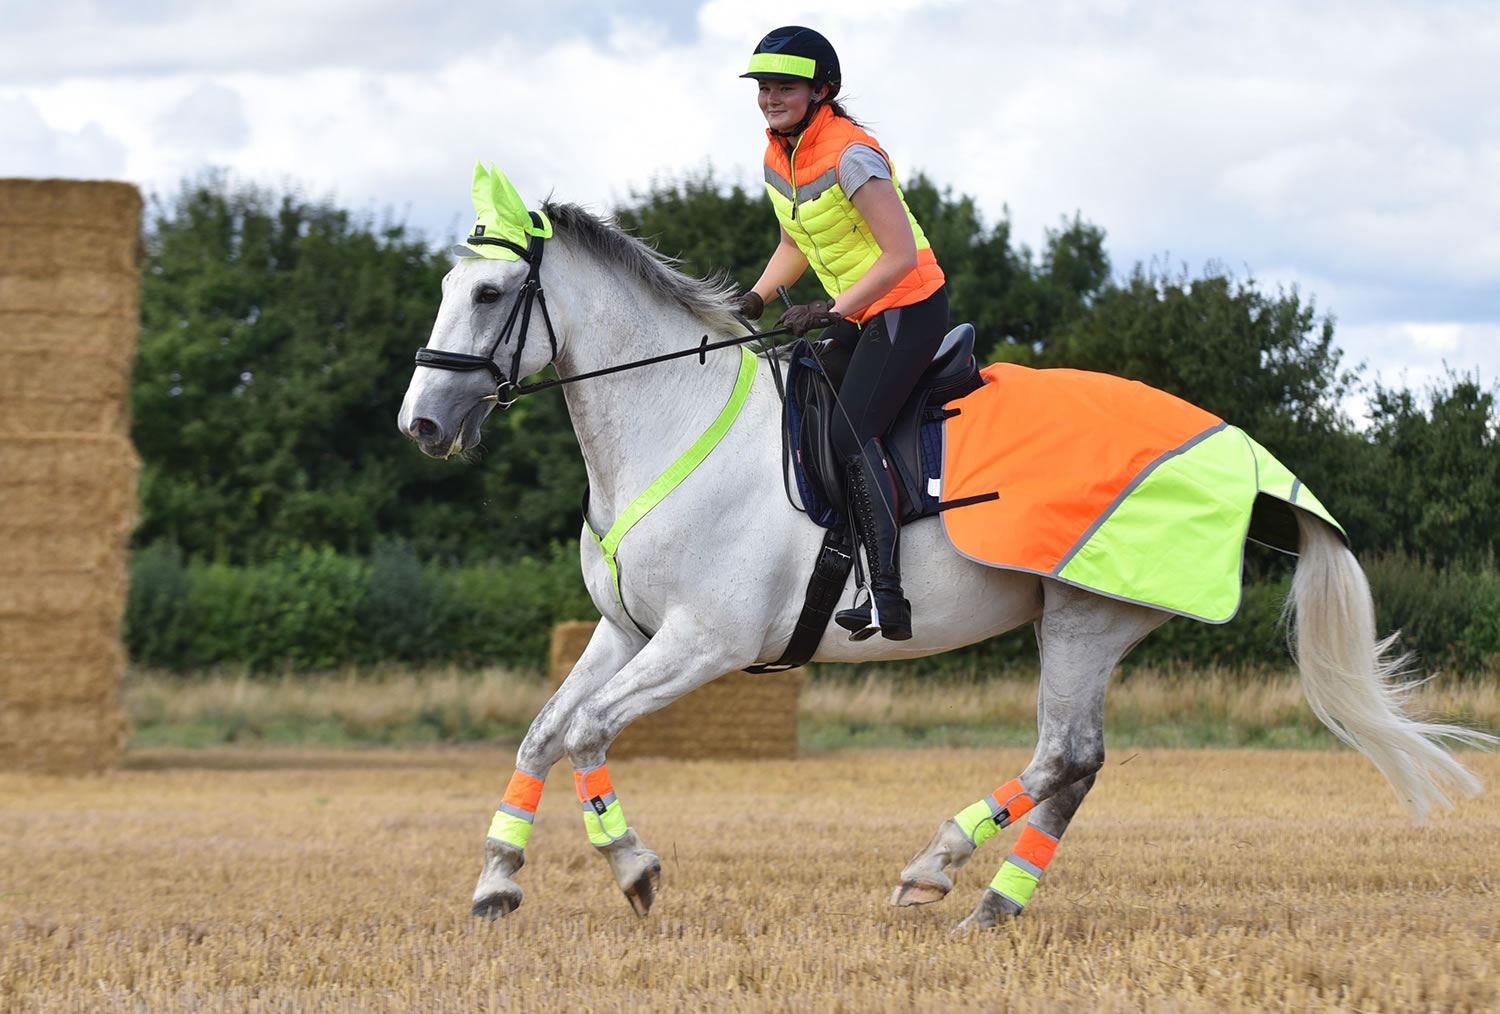 Equisafety Breathable Mesh Quarter Sheet - Just Horse Riders